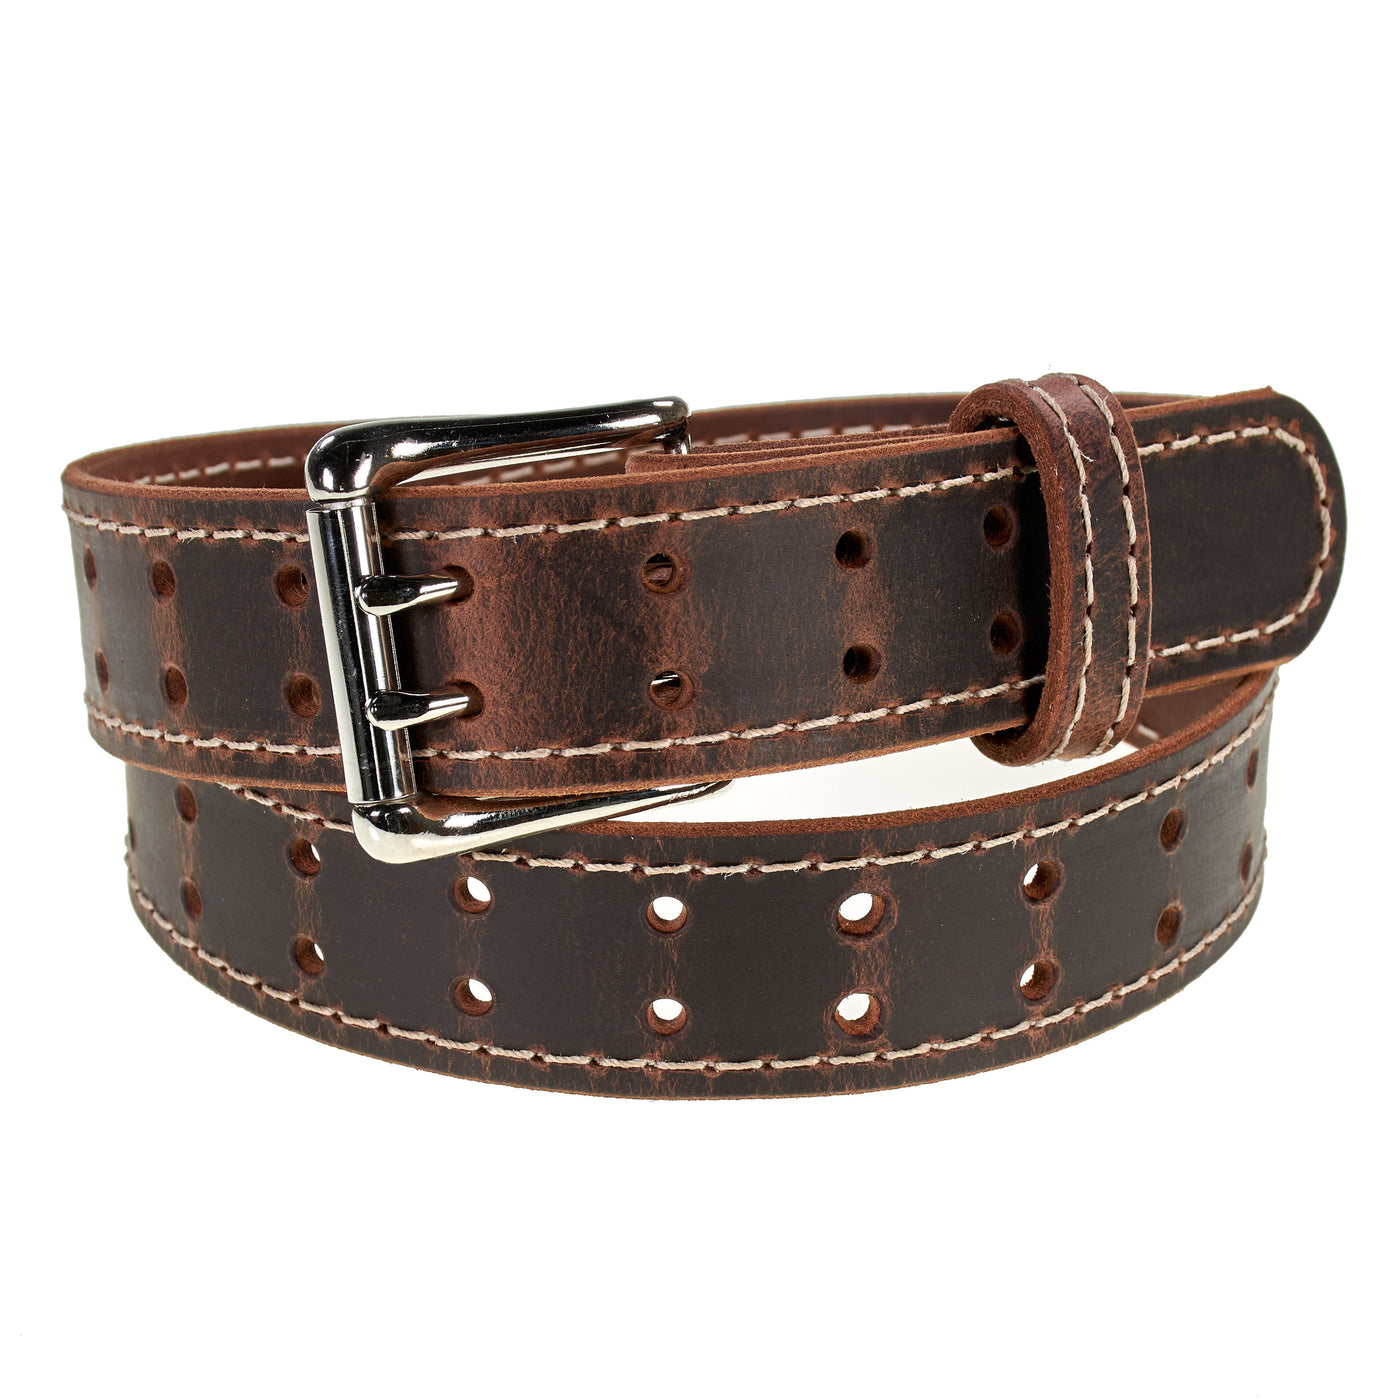 Double Prong Retro Style Leather Belt - 1.5" Nickel Buckle